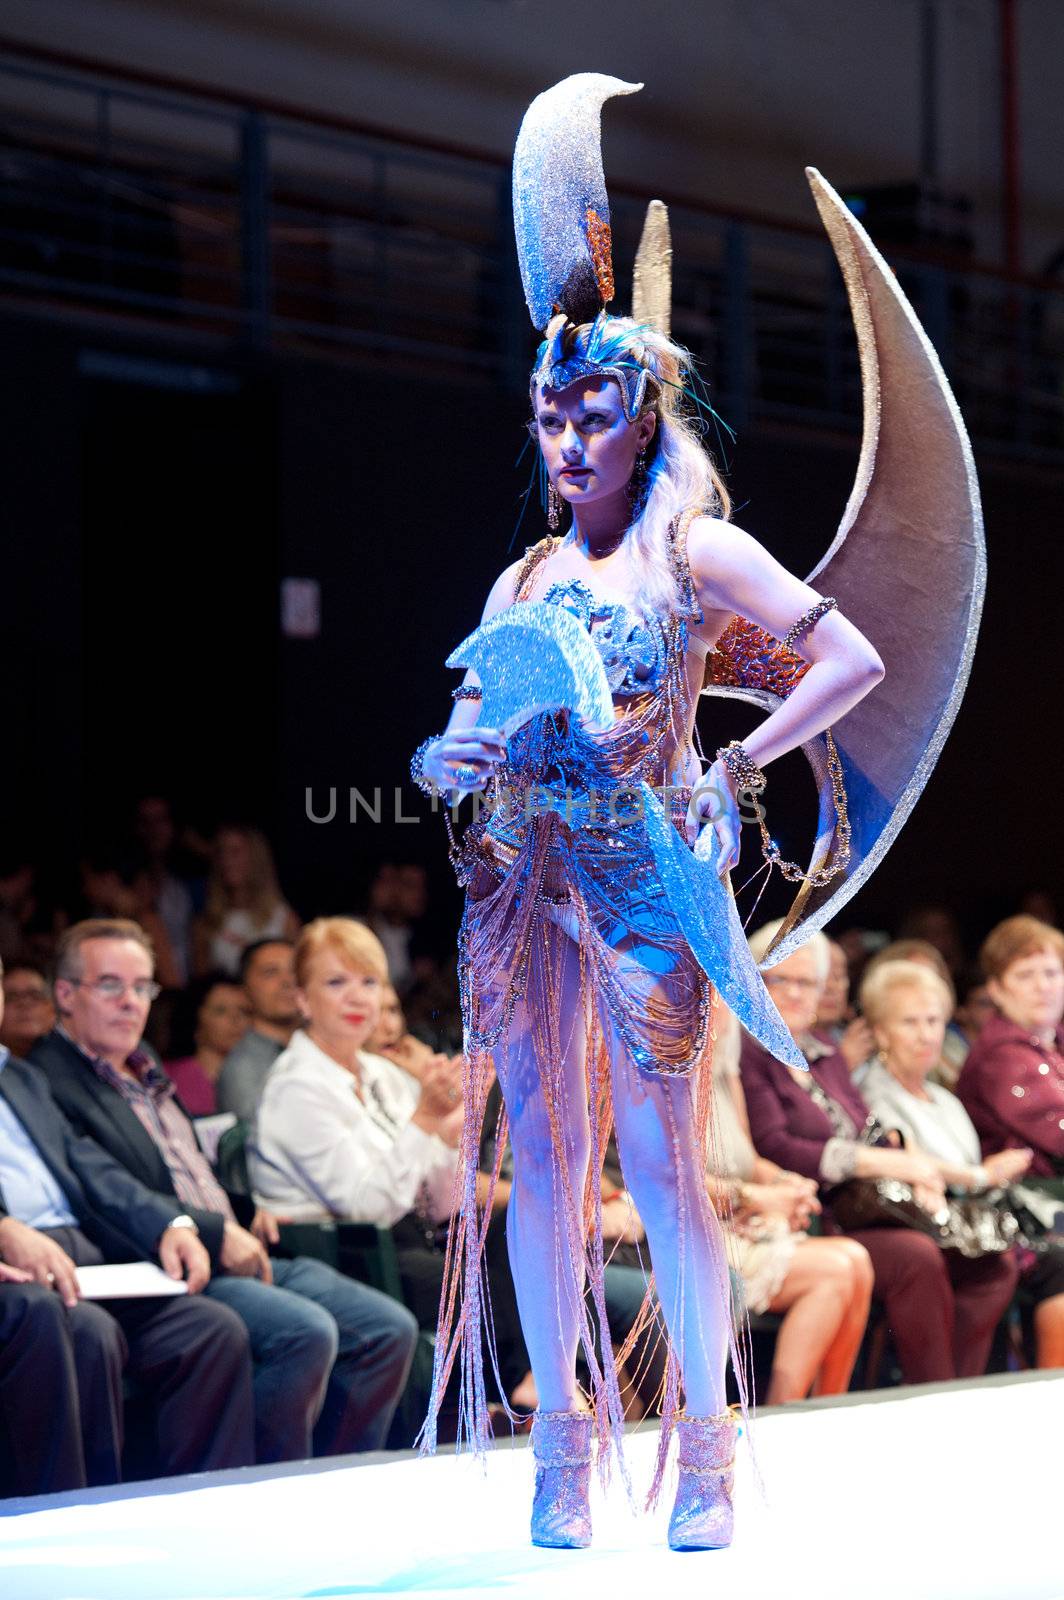 CANARY ISLANDS - 28 OCTOBER: Model on the catwalk wearing carnival costume from designer Rafael Deniz and Rosa Montesdeoca during Carnival Fashion Week October 28, 2011 in Canary Islands, Spain